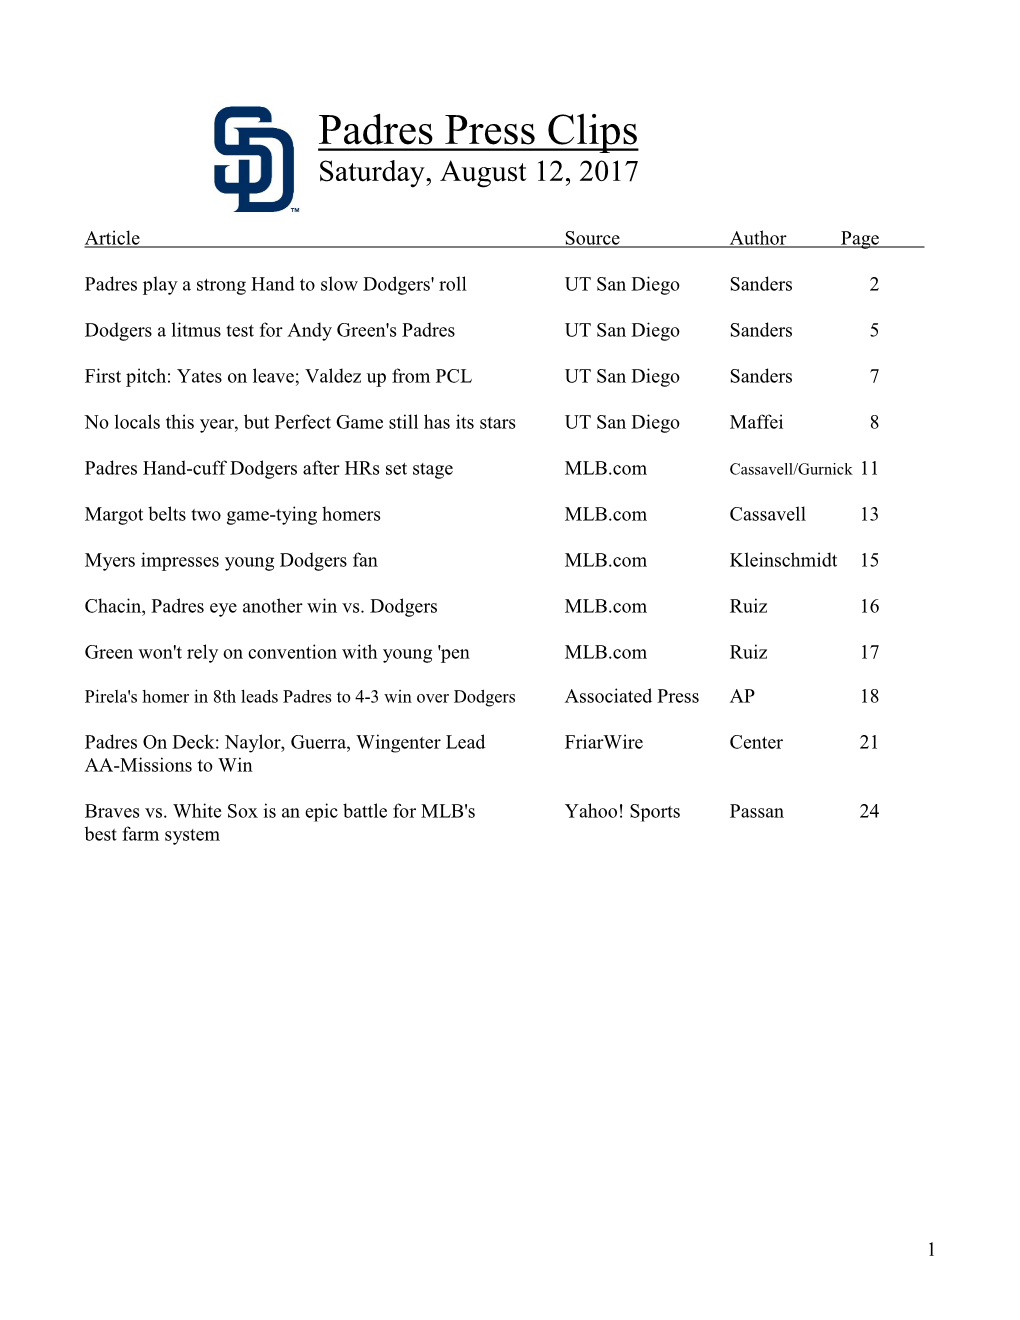 Padres Press Clips Saturday, August 12, 2017